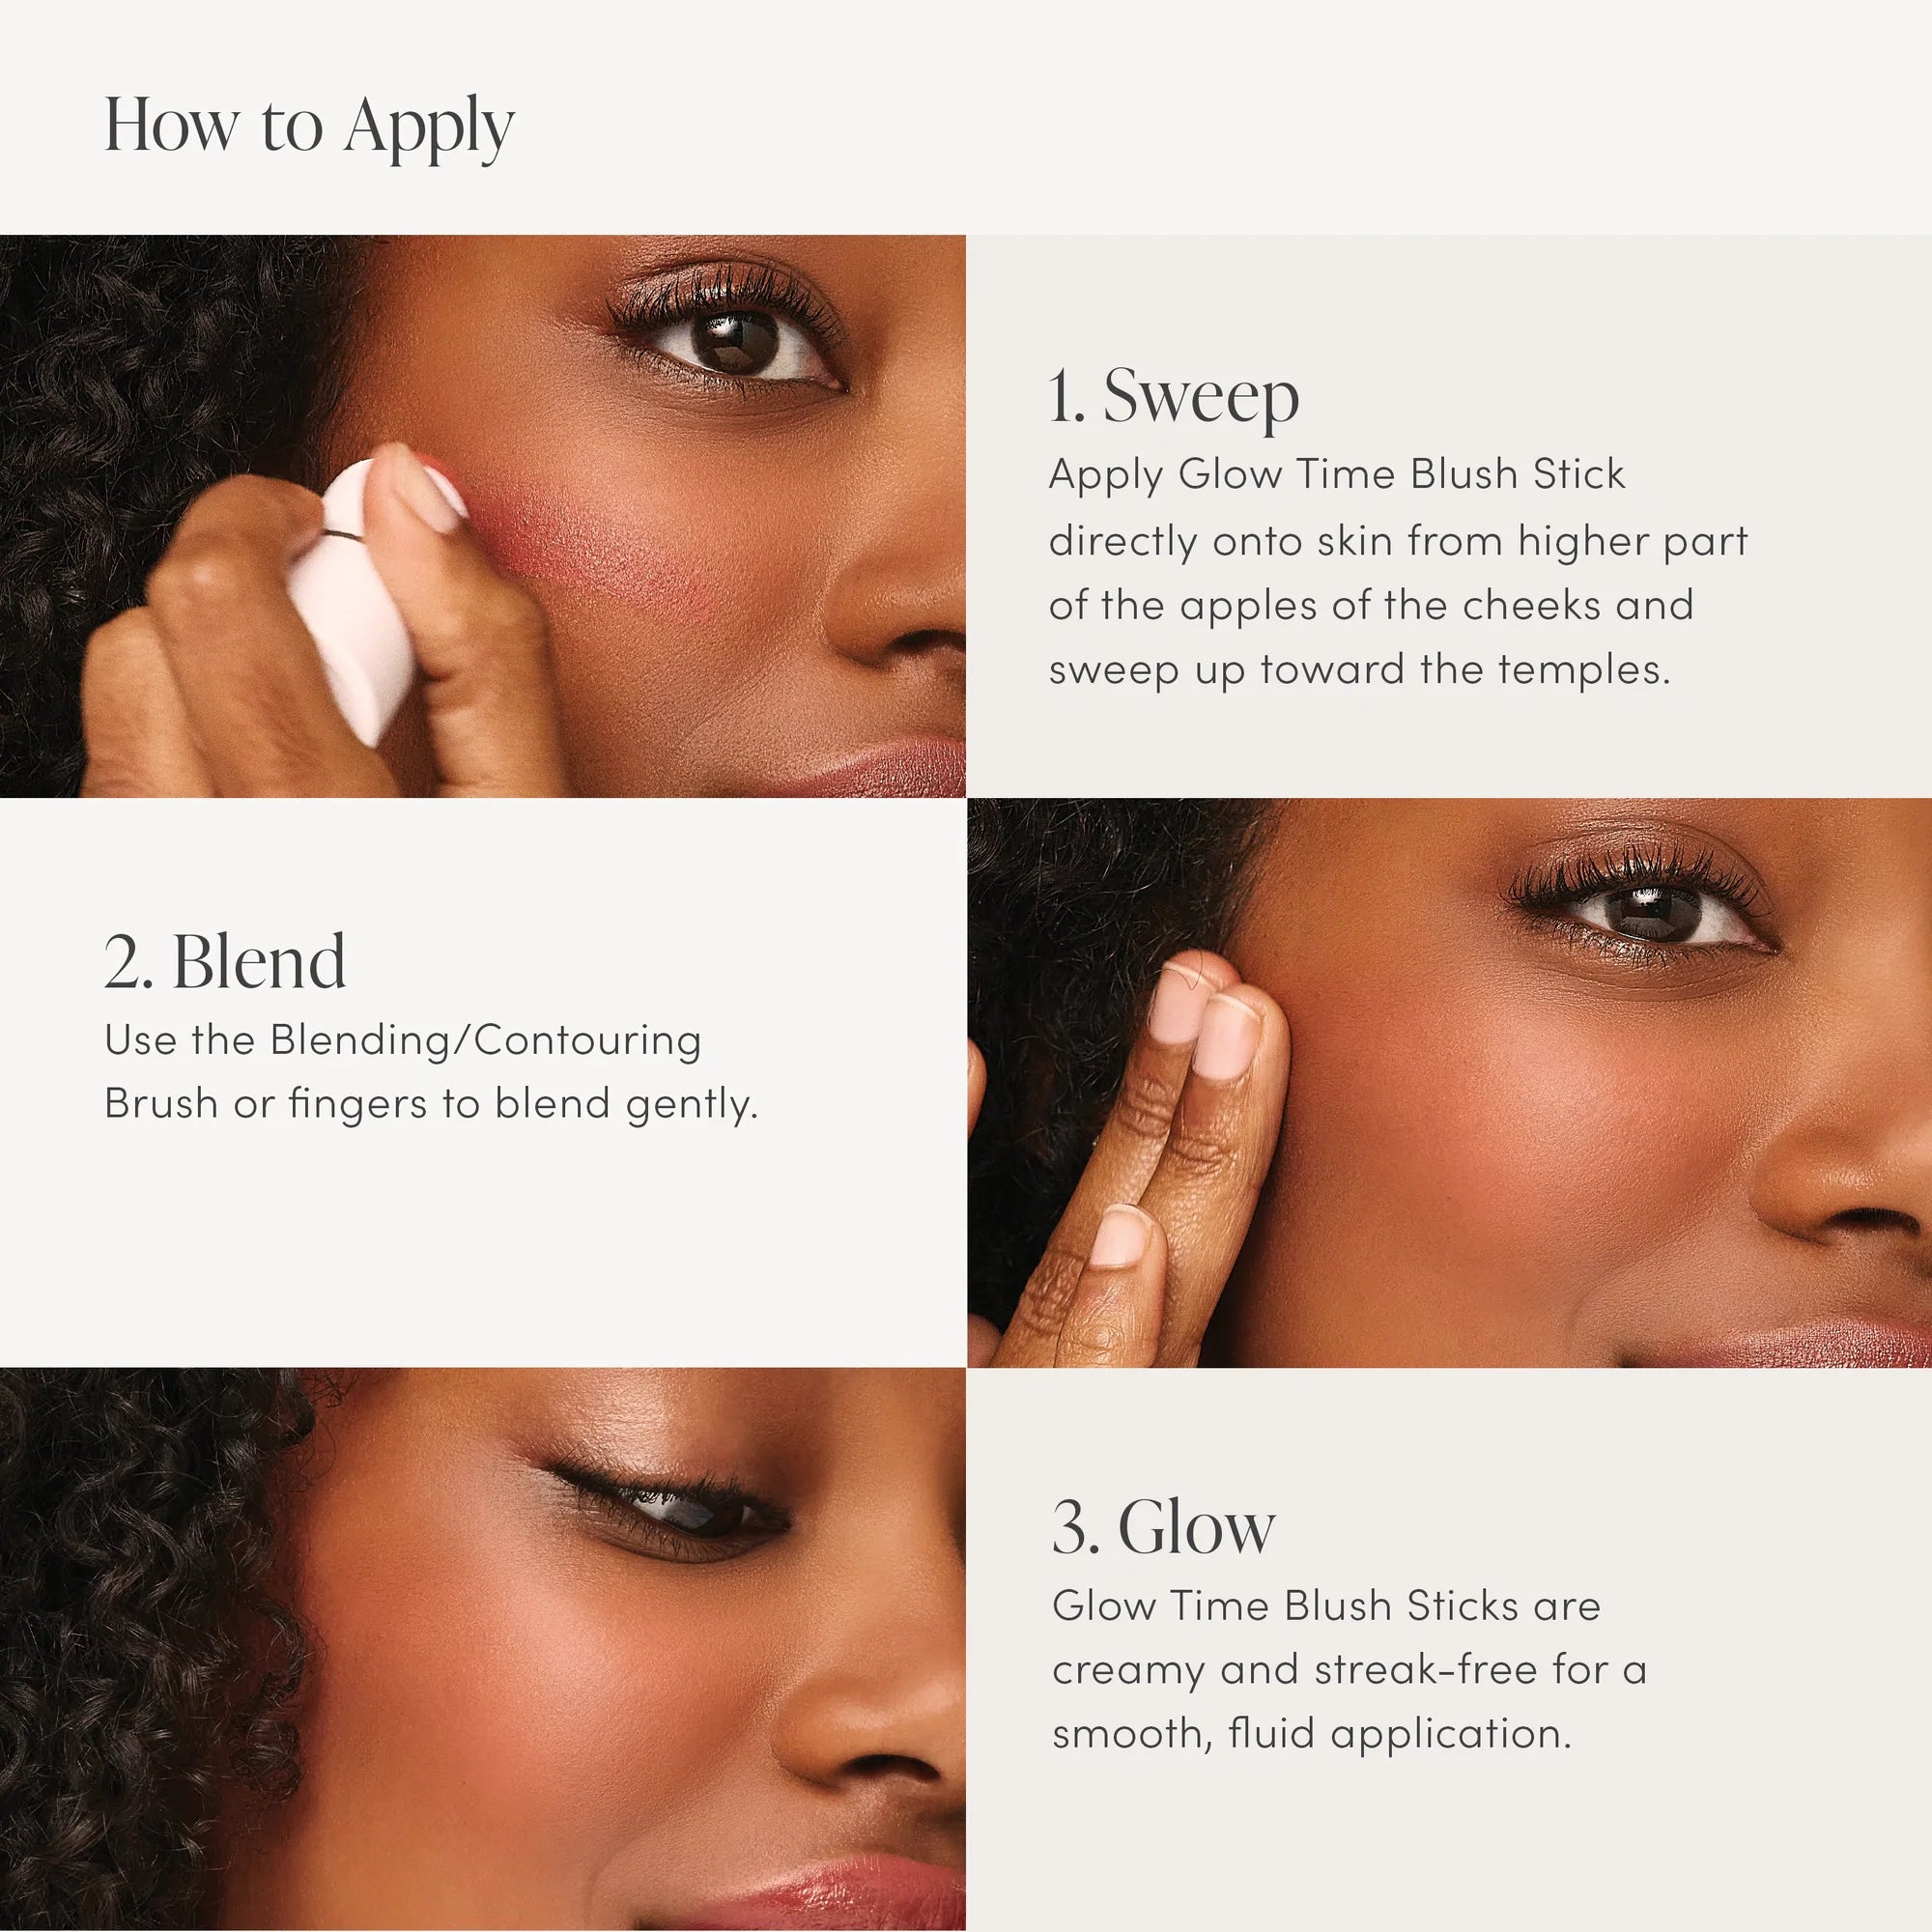 Jane Iredale Glow Time Blush Stick chart on how to apply.